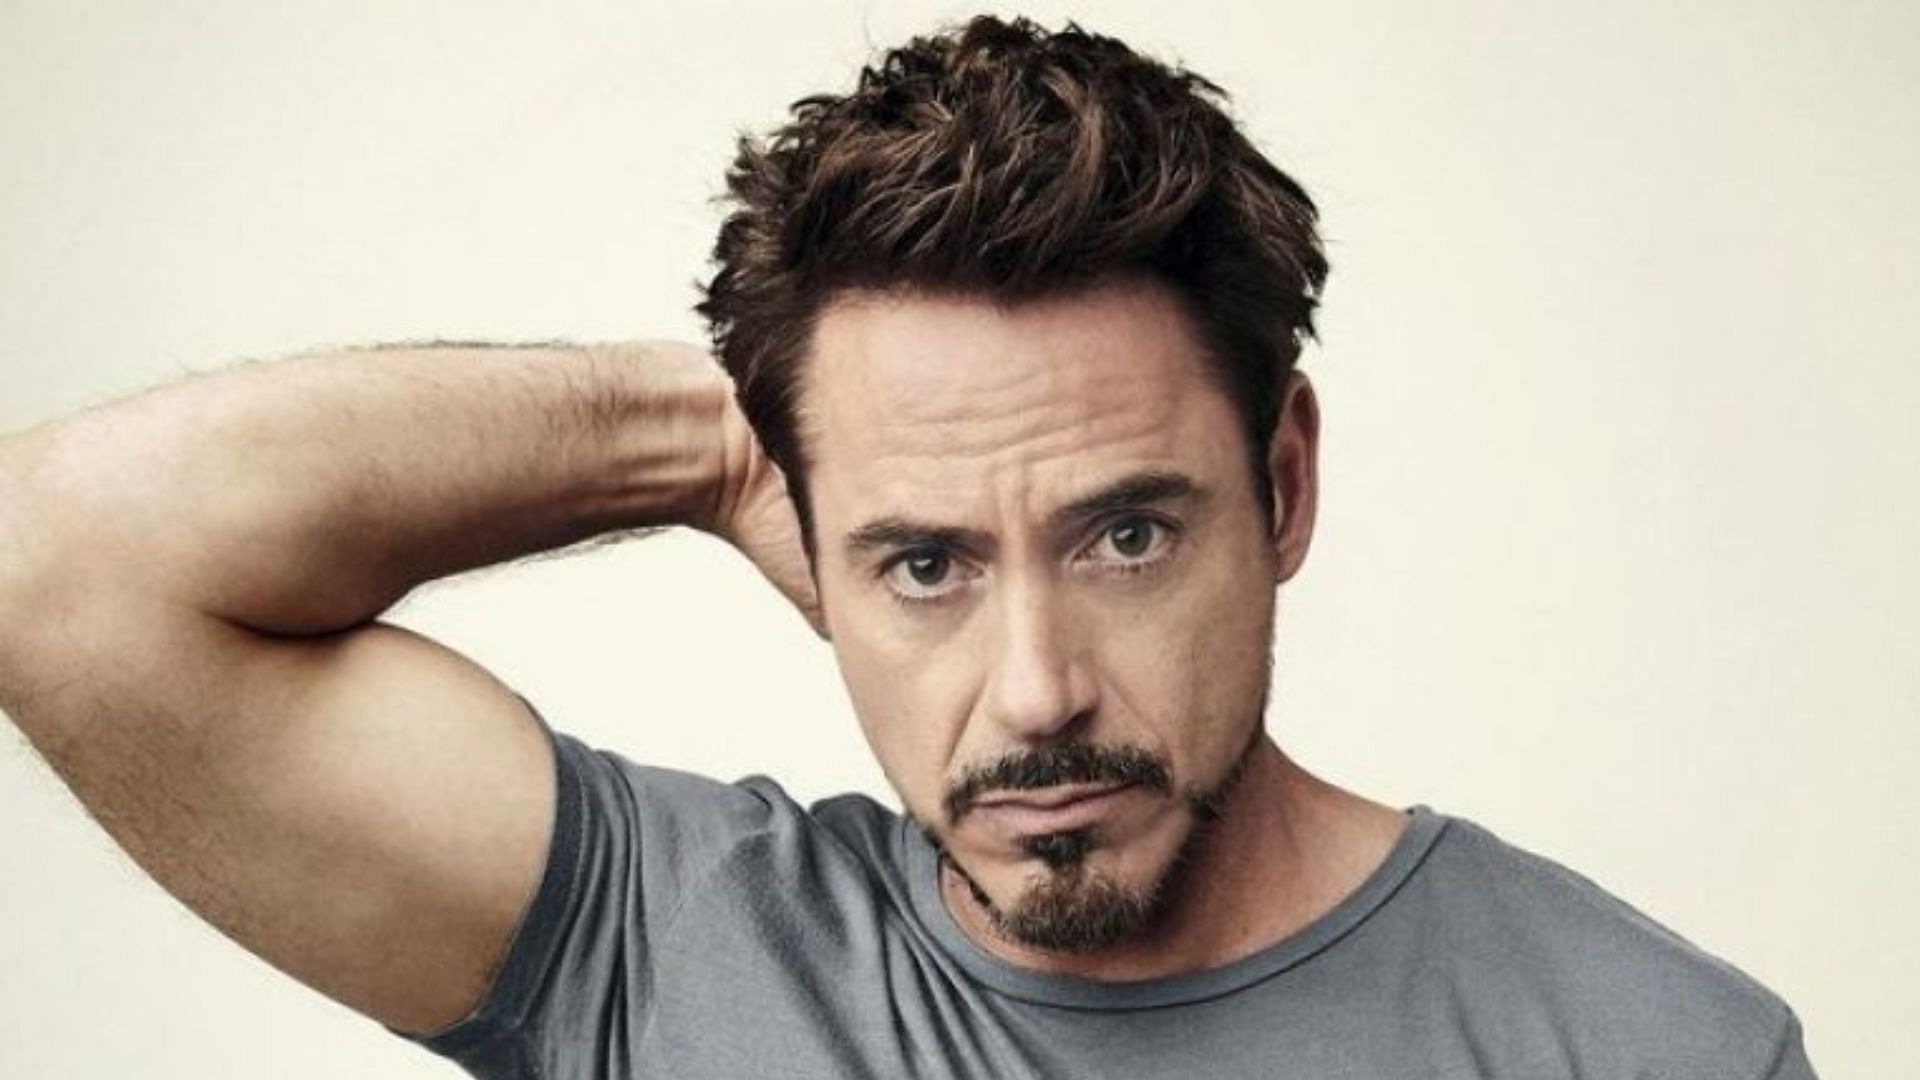 Robert Downey Jr., one of the most admired actors in Hollywood